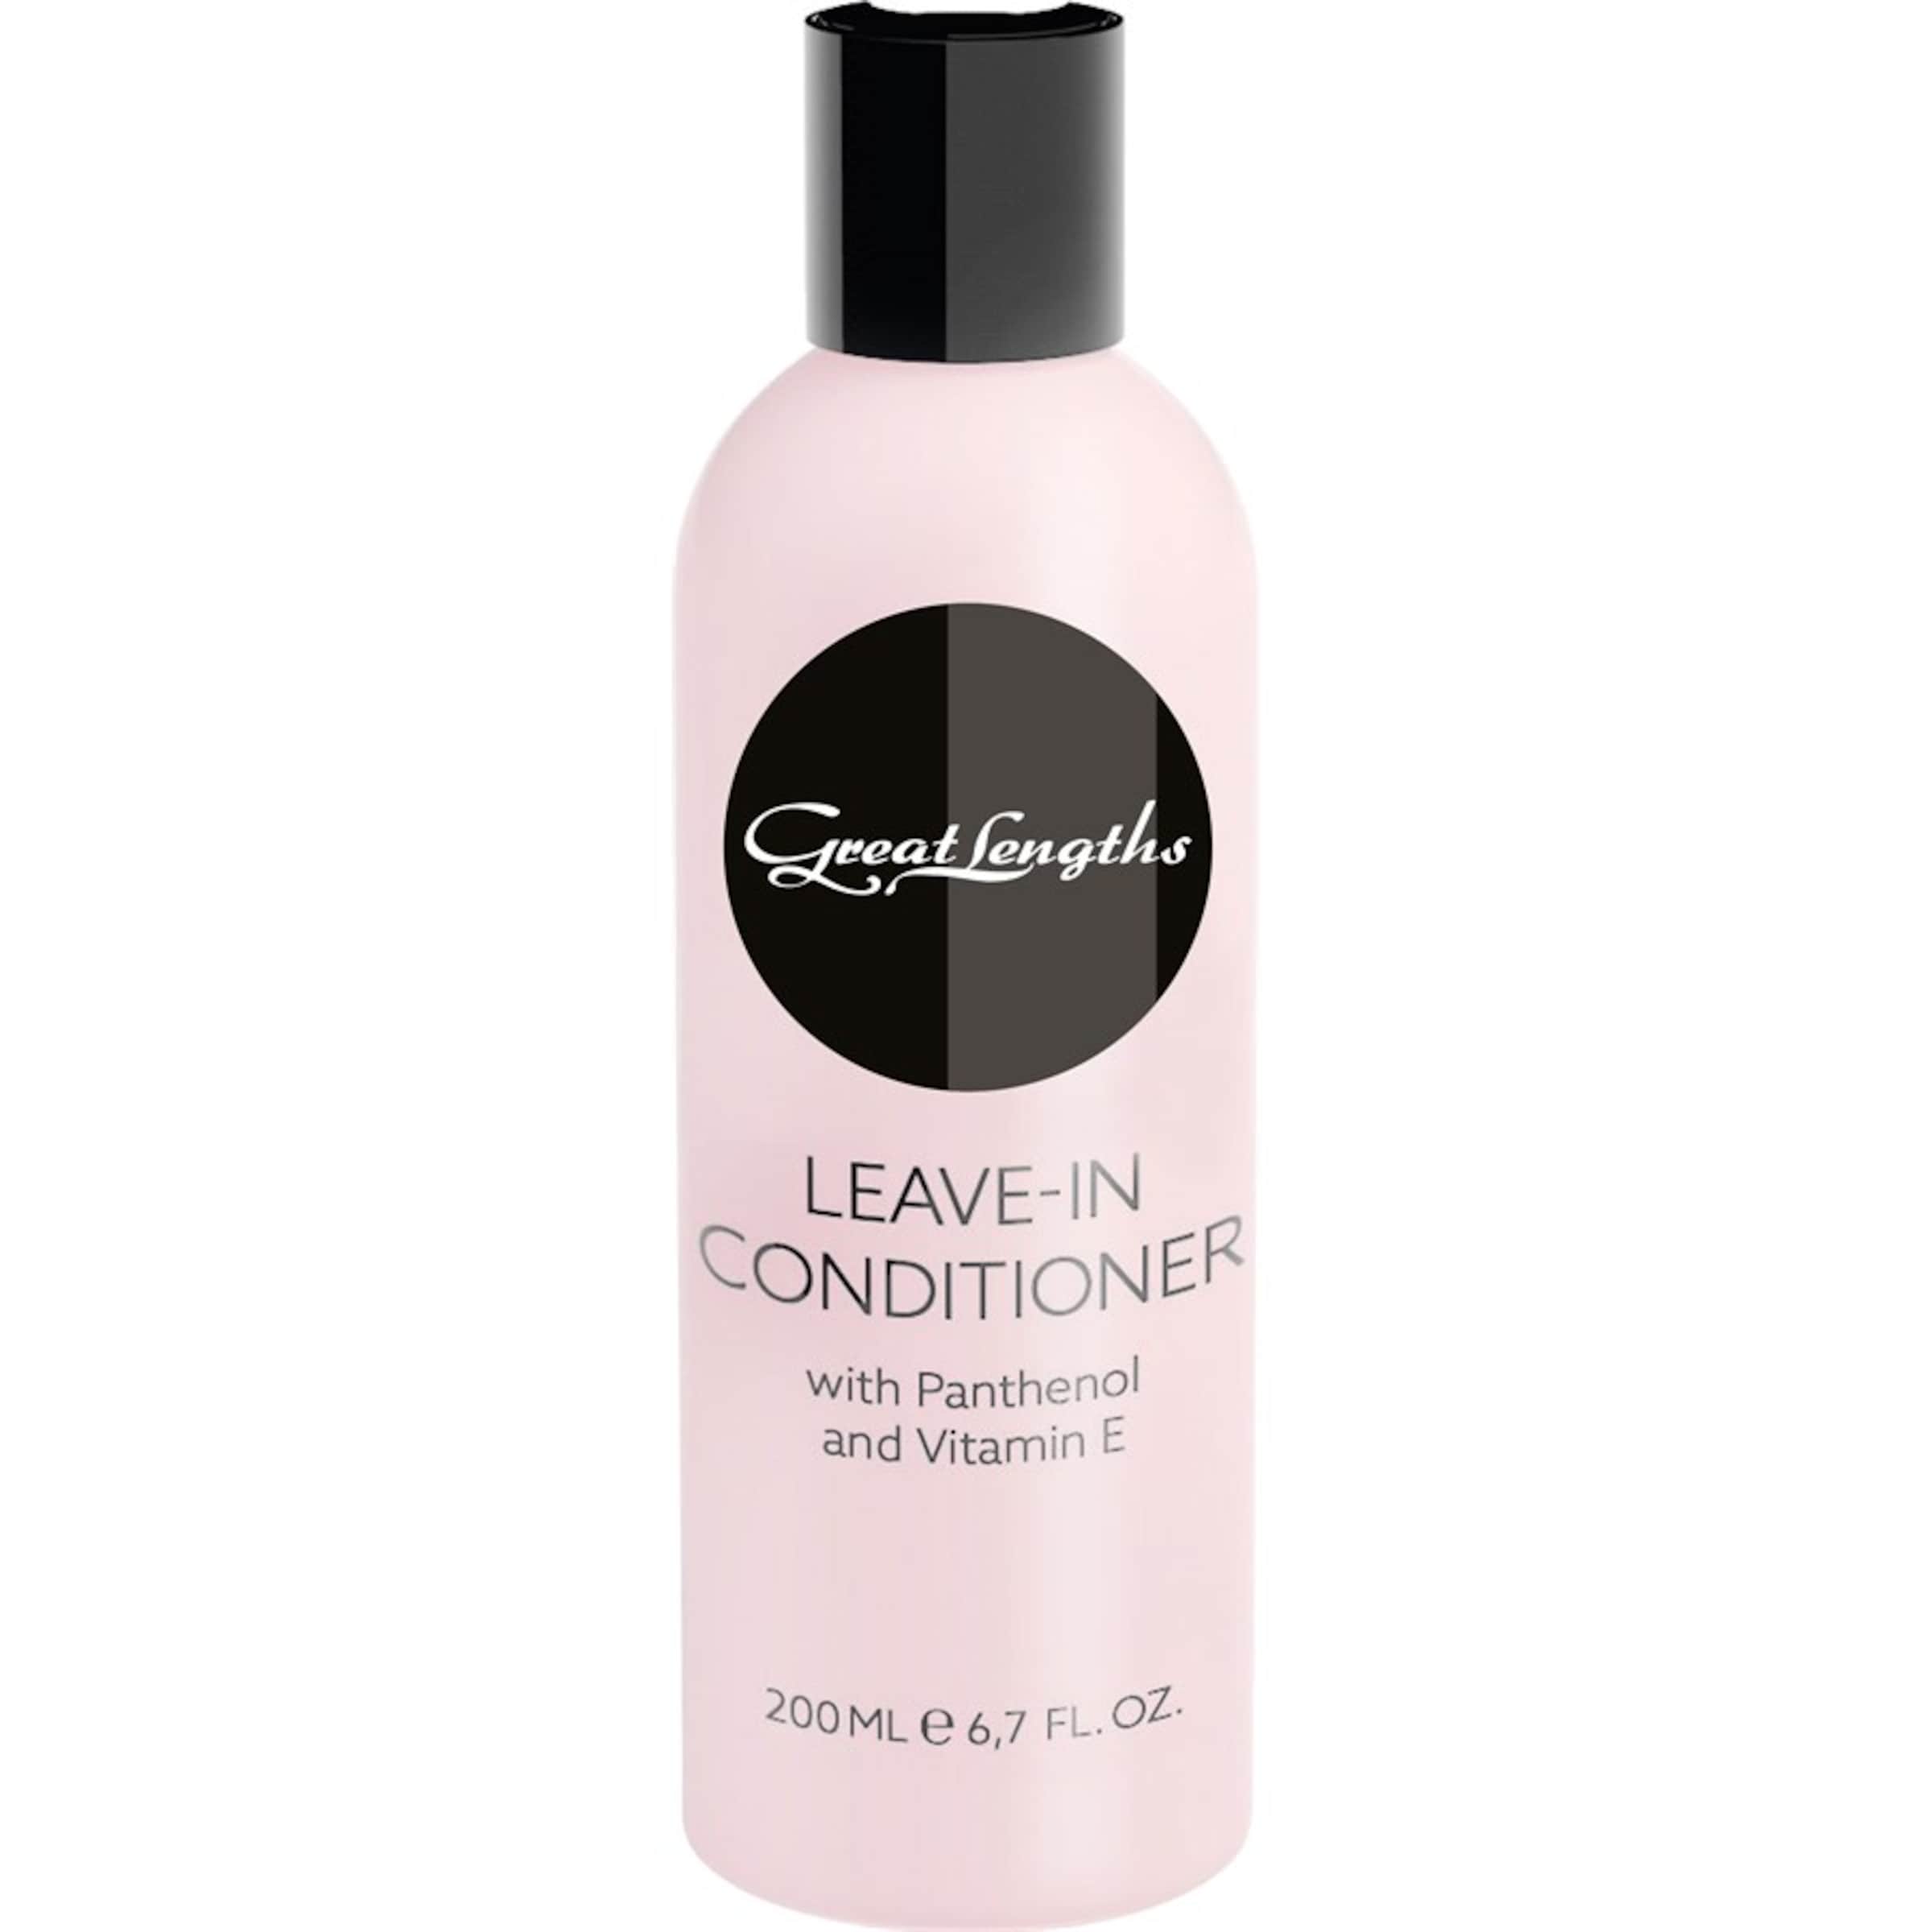 Great Lengths Conditioner Leave-In in 